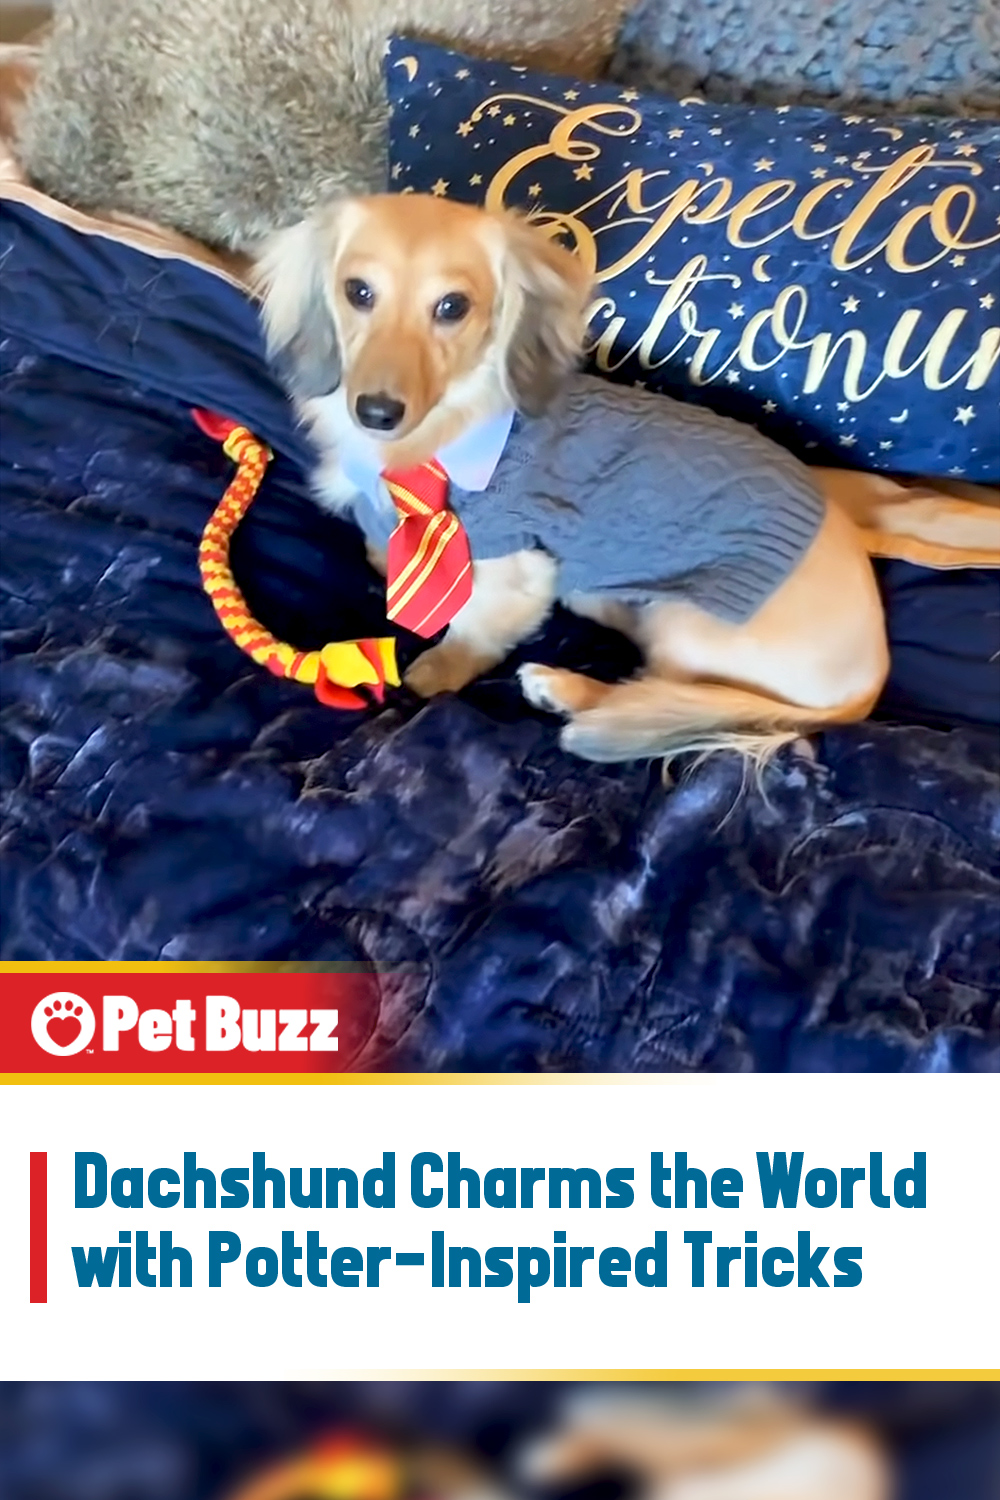 Dachshund Charms the World with Potter-Inspired Tricks